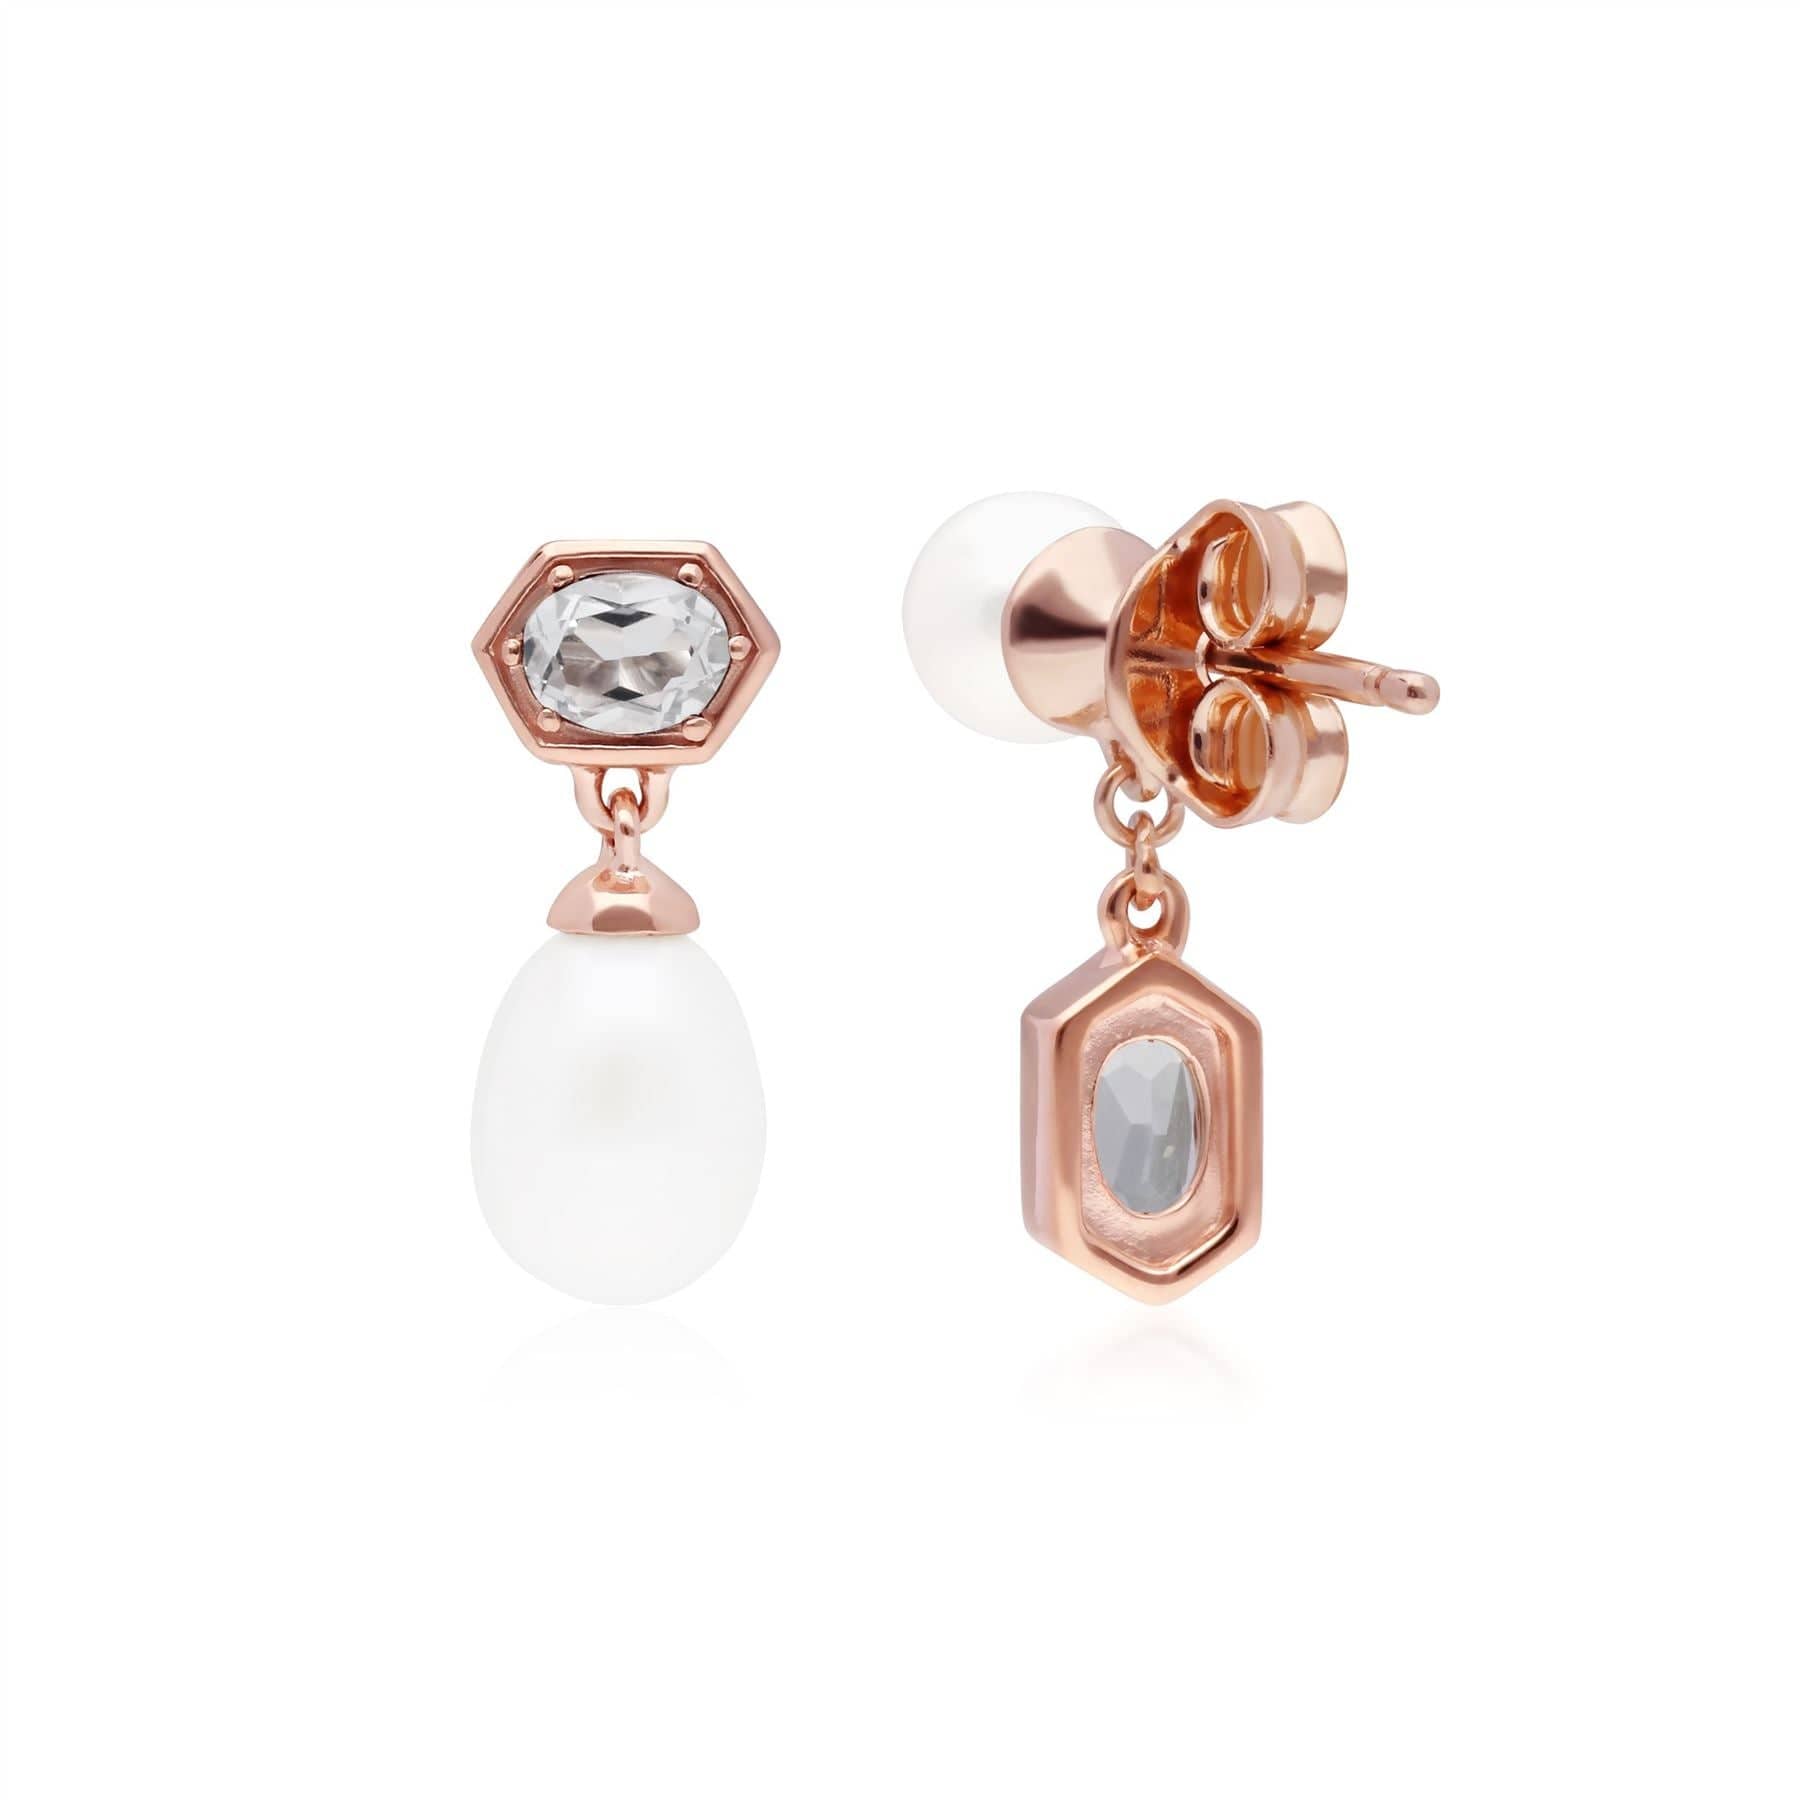 270E030409925 Modern Pearl & White Topaz Mismatched Drop Earrings in Rose Gold Plated Silver 2